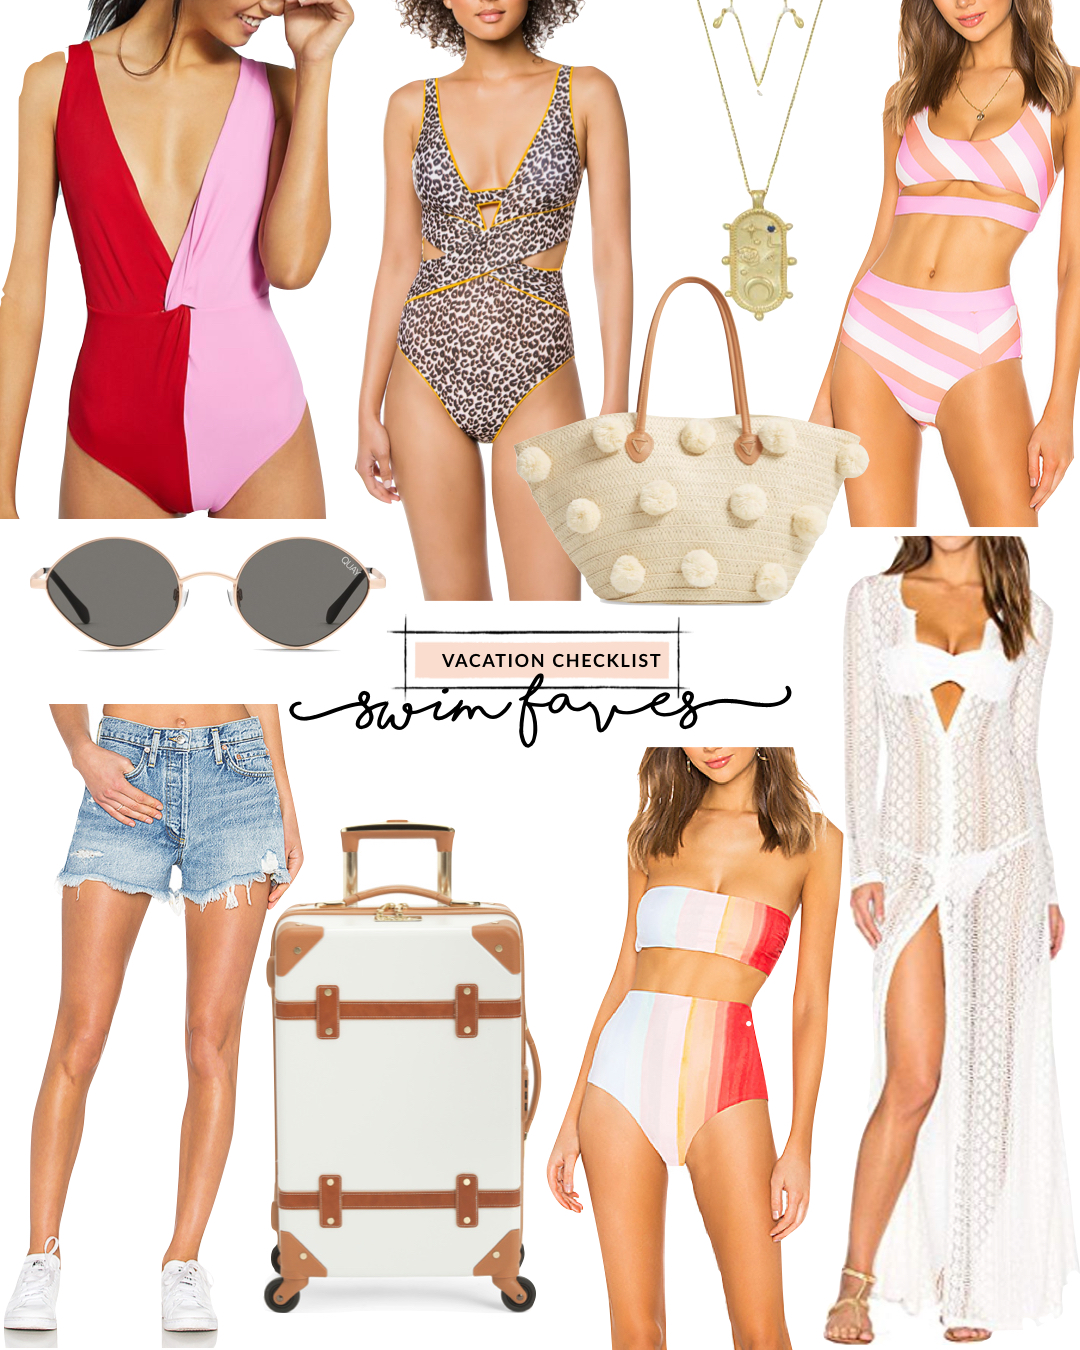 swimsuits for all - Gypsy Tan